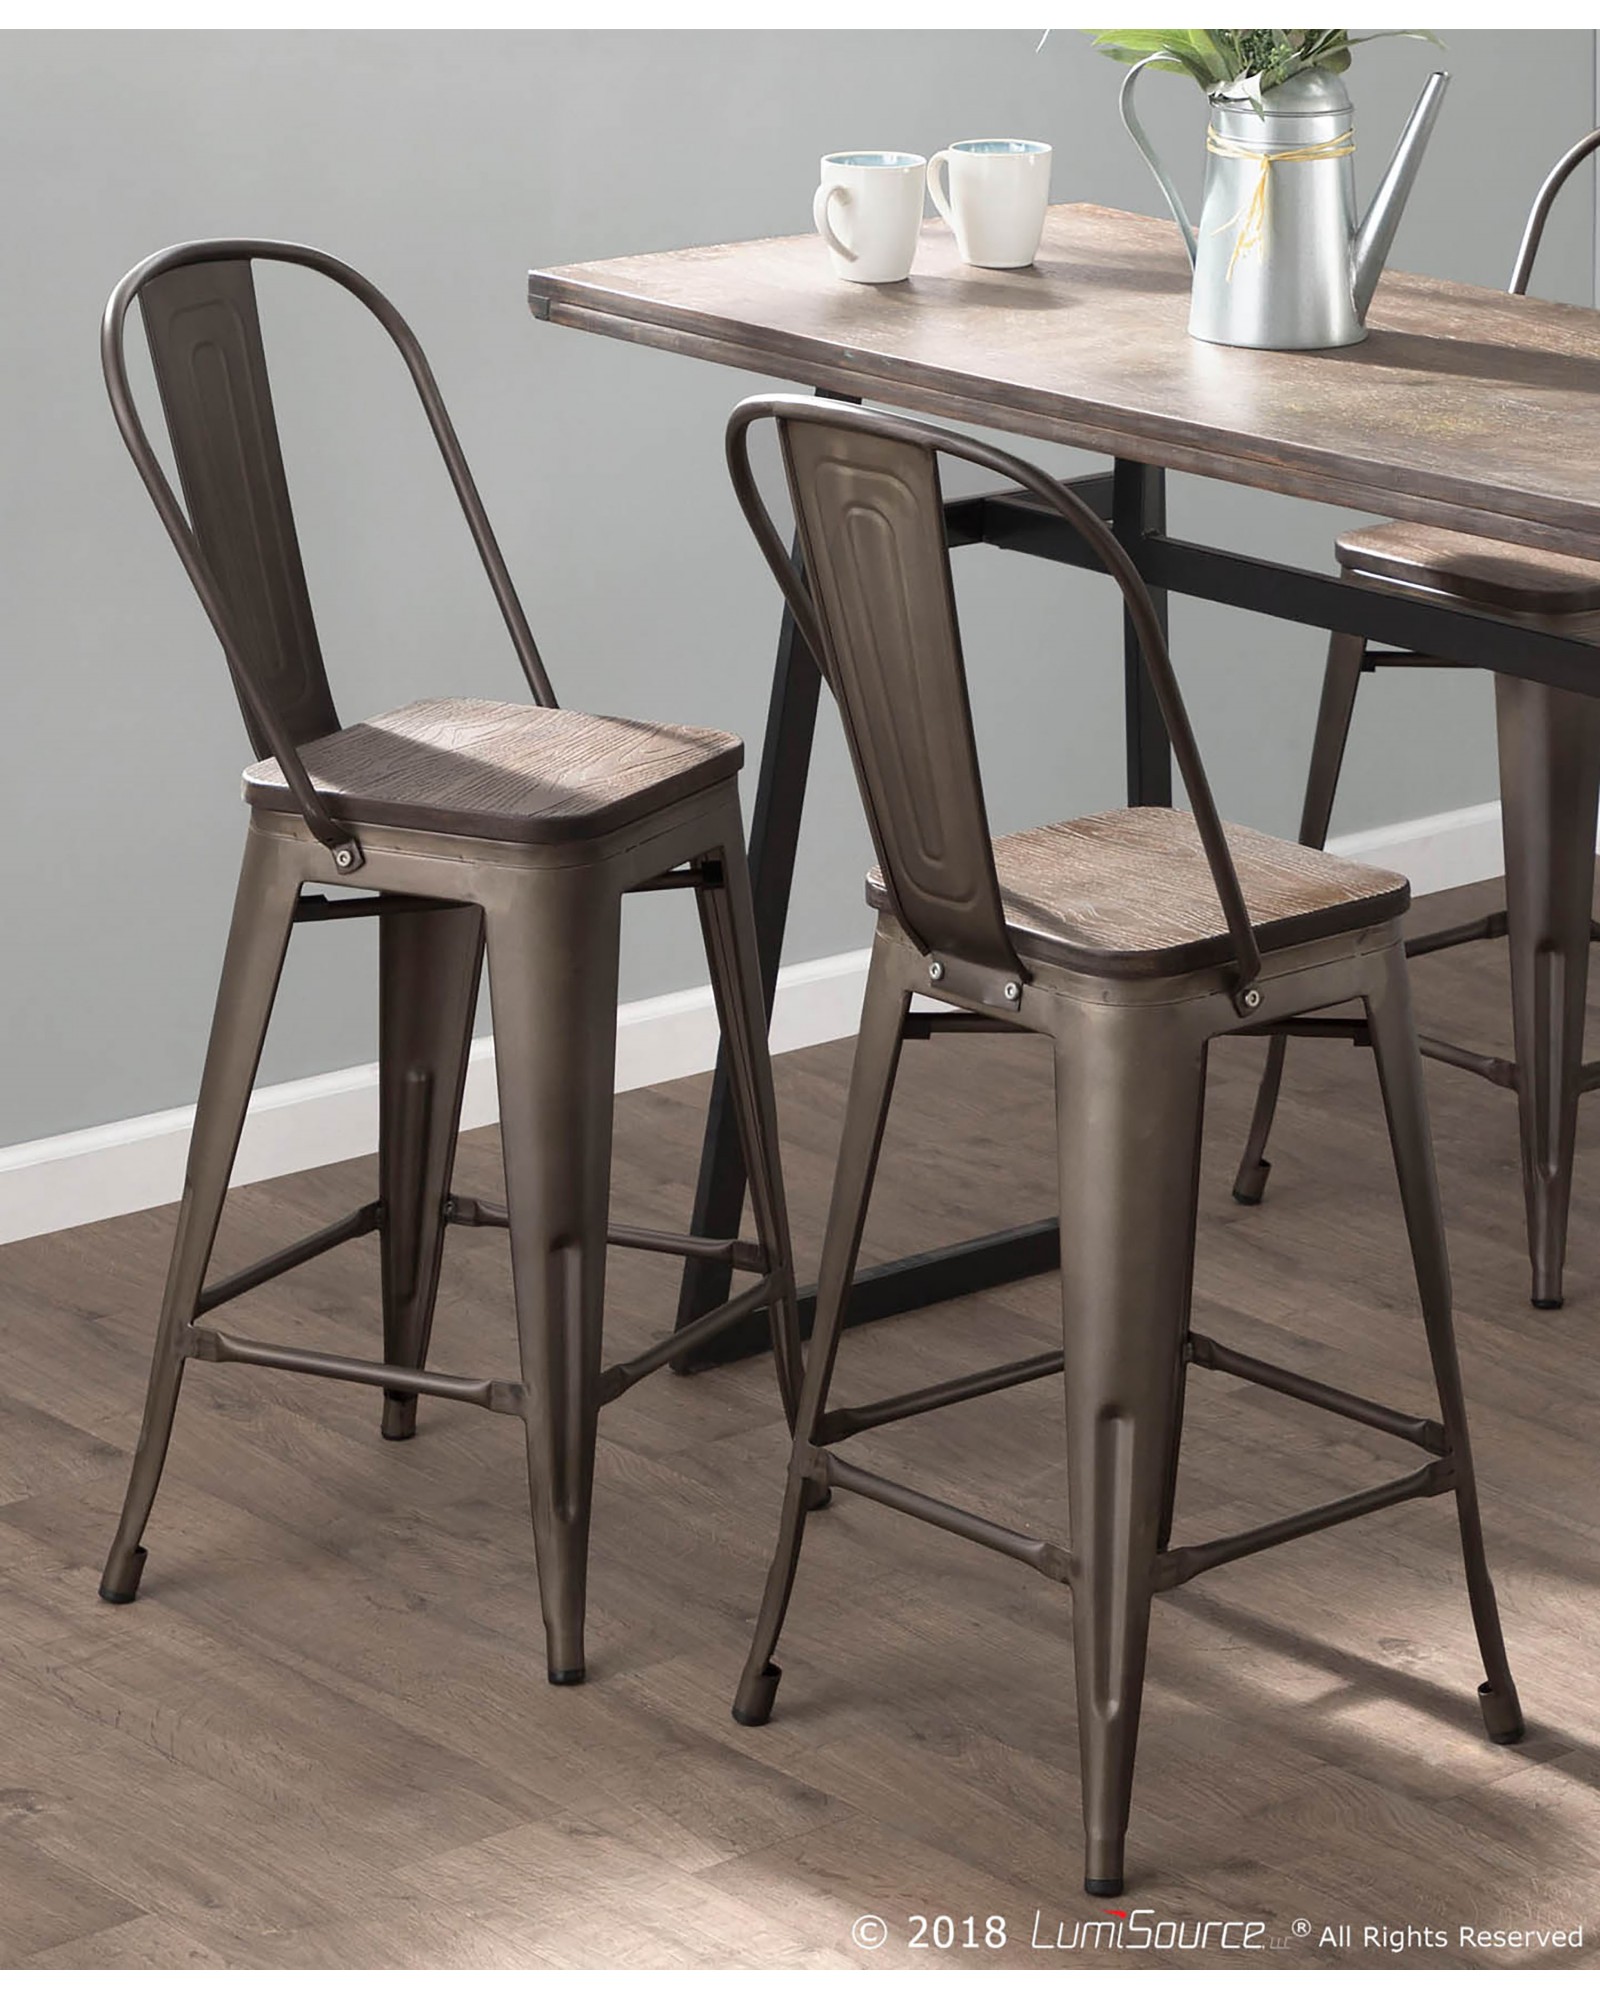 Oregon Industrial High Back Counter Stool in Antique and Espresso - Set of 2